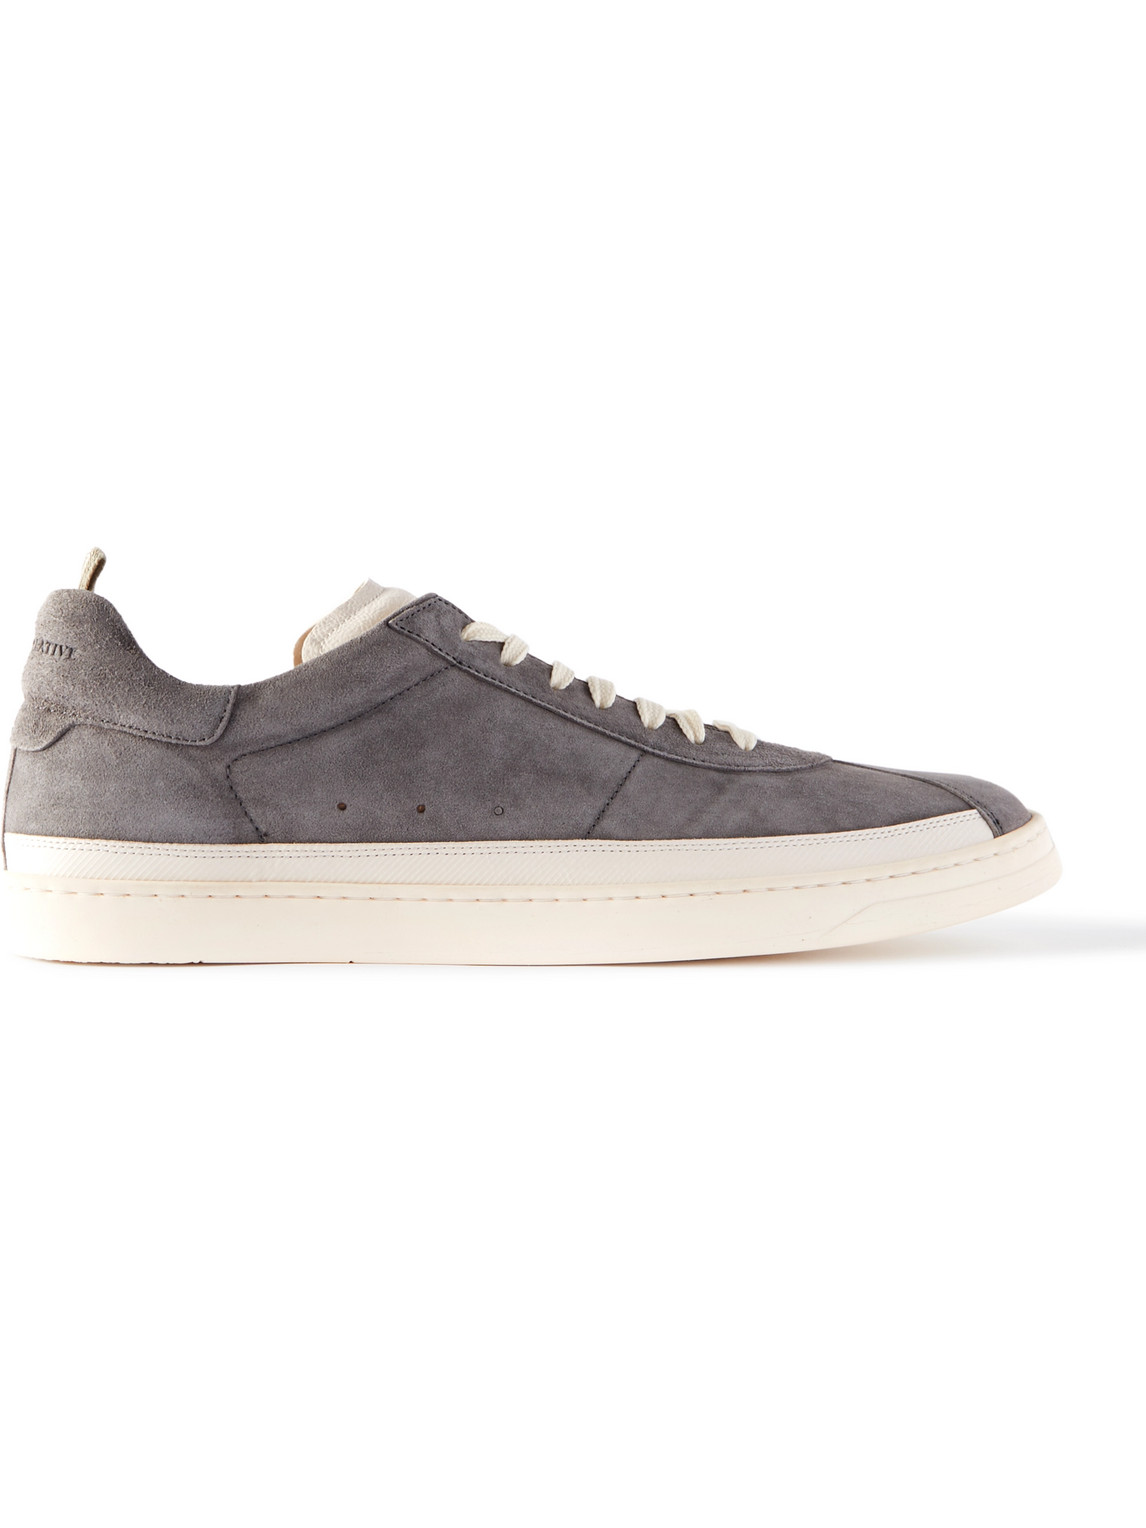 Officine Creative Karma Leather-Trimmed Suede Sneakers